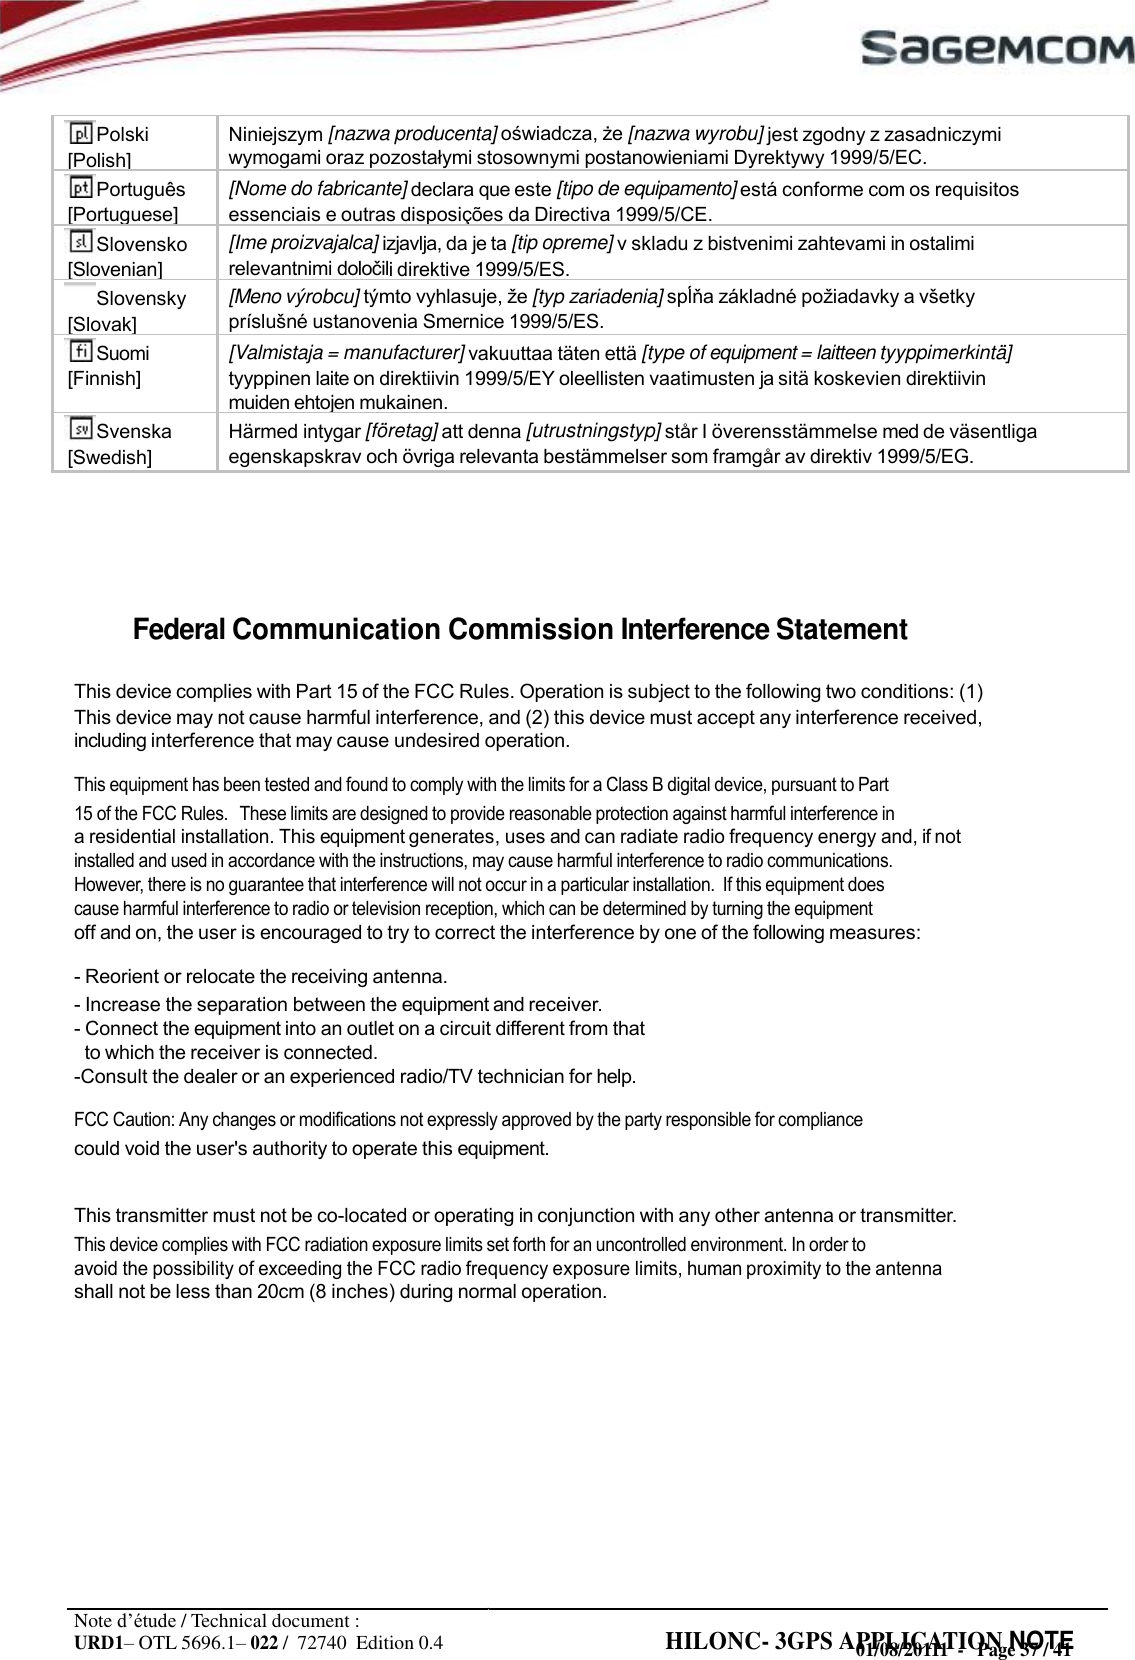 URD1– OTL 5696.1– 022 /  72740  Edition 0.4 HILONC- 3GPS APPLICATION NOTE                           Federal Communication Commission Interference Statement  This device complies with Part 15 of the FCC Rules. Operation is subject to the following two conditions: (1) This device may not cause harmful interference, and (2) this device must accept any interference received, including interference that may cause undesired operation. This equipment has been tested and found to comply with the limits for a Class B digital device, pursuant to Part 15 of the FCC Rules.   These limits are designed to provide reasonable protection against harmful interference in a residential installation. This equipment generates, uses and can radiate radio frequency energy and, if not installed and used in accordance with the instructions, may cause harmful interference to radio communications. However, there is no guarantee that interference will not occur in a particular installation.  If this equipment does cause harmful interference to radio or television reception, which can be determined by turning the equipment off and on, the user is encouraged to try to correct the interference by one of the following measures: - Reorient or relocate the receiving antenna. - Increase the separation between the equipment and receiver. - Connect the equipment into an outlet on a circuit different from that to which the receiver is connected. -Consult the dealer or an experienced radio/TV technician for help. FCC Caution: Any changes or modifications not expressly approved by the party responsible for compliance could void the user&apos;s authority to operate this equipment.  This transmitter must not be co-located or operating in conjunction with any other antenna or transmitter. This device complies with FCC radiation exposure limits set forth for an uncontrolled environment. In order to avoid the possibility of exceeding the FCC radio frequency exposure limits, human proximity to the antenna shall not be less than 20cm (8 inches) during normal operation.             Note d’étude / Technical document : 01/08/20111  -   Page 37 / 41Polski [Polish] Niniejszym [nazwa producenta]   [nazwa wyrobu] jest zgodny z zasadniczymi wymogami oraz  stosownymi postanowieniami Dyrektywy 1999/5/EC. Português [Portuguese] [Nome do fabricante] declara que este [tipo de equipamento] está conforme com os requisitos essenciais e outras disposições da Directiva 1999/5/CE. Slovensko [Slovenian] [Ime proizvajalca] izjavlja, da je ta [tip opreme] v skladu z bistvenimi zahtevami in ostalimi relevantnimi i direktive 1999/5/ES. Slovensky [Slovak] [Meno výrobcu] týmto vyhlasuje,  [typ zariadenia]  základné  a   ustanovenia Smernice 1999/5/ES. Suomi [Finnish] [Valmistaja = manufacturer] vakuuttaa täten että [type of equipment = laitteen tyyppimerkintä] tyyppinen laite on direktiivin 1999/5/EY oleellisten vaatimusten ja sitä koskevien direktiivin muiden ehtojen mukainen. Svenska [Swedish] Härmed intygar [företag] att denna [utrustningstyp] står I överensstämmelse med de väsentliga egenskapskrav och övriga relevanta bestämmelser som framgår av direktiv 1999/5/EG.  